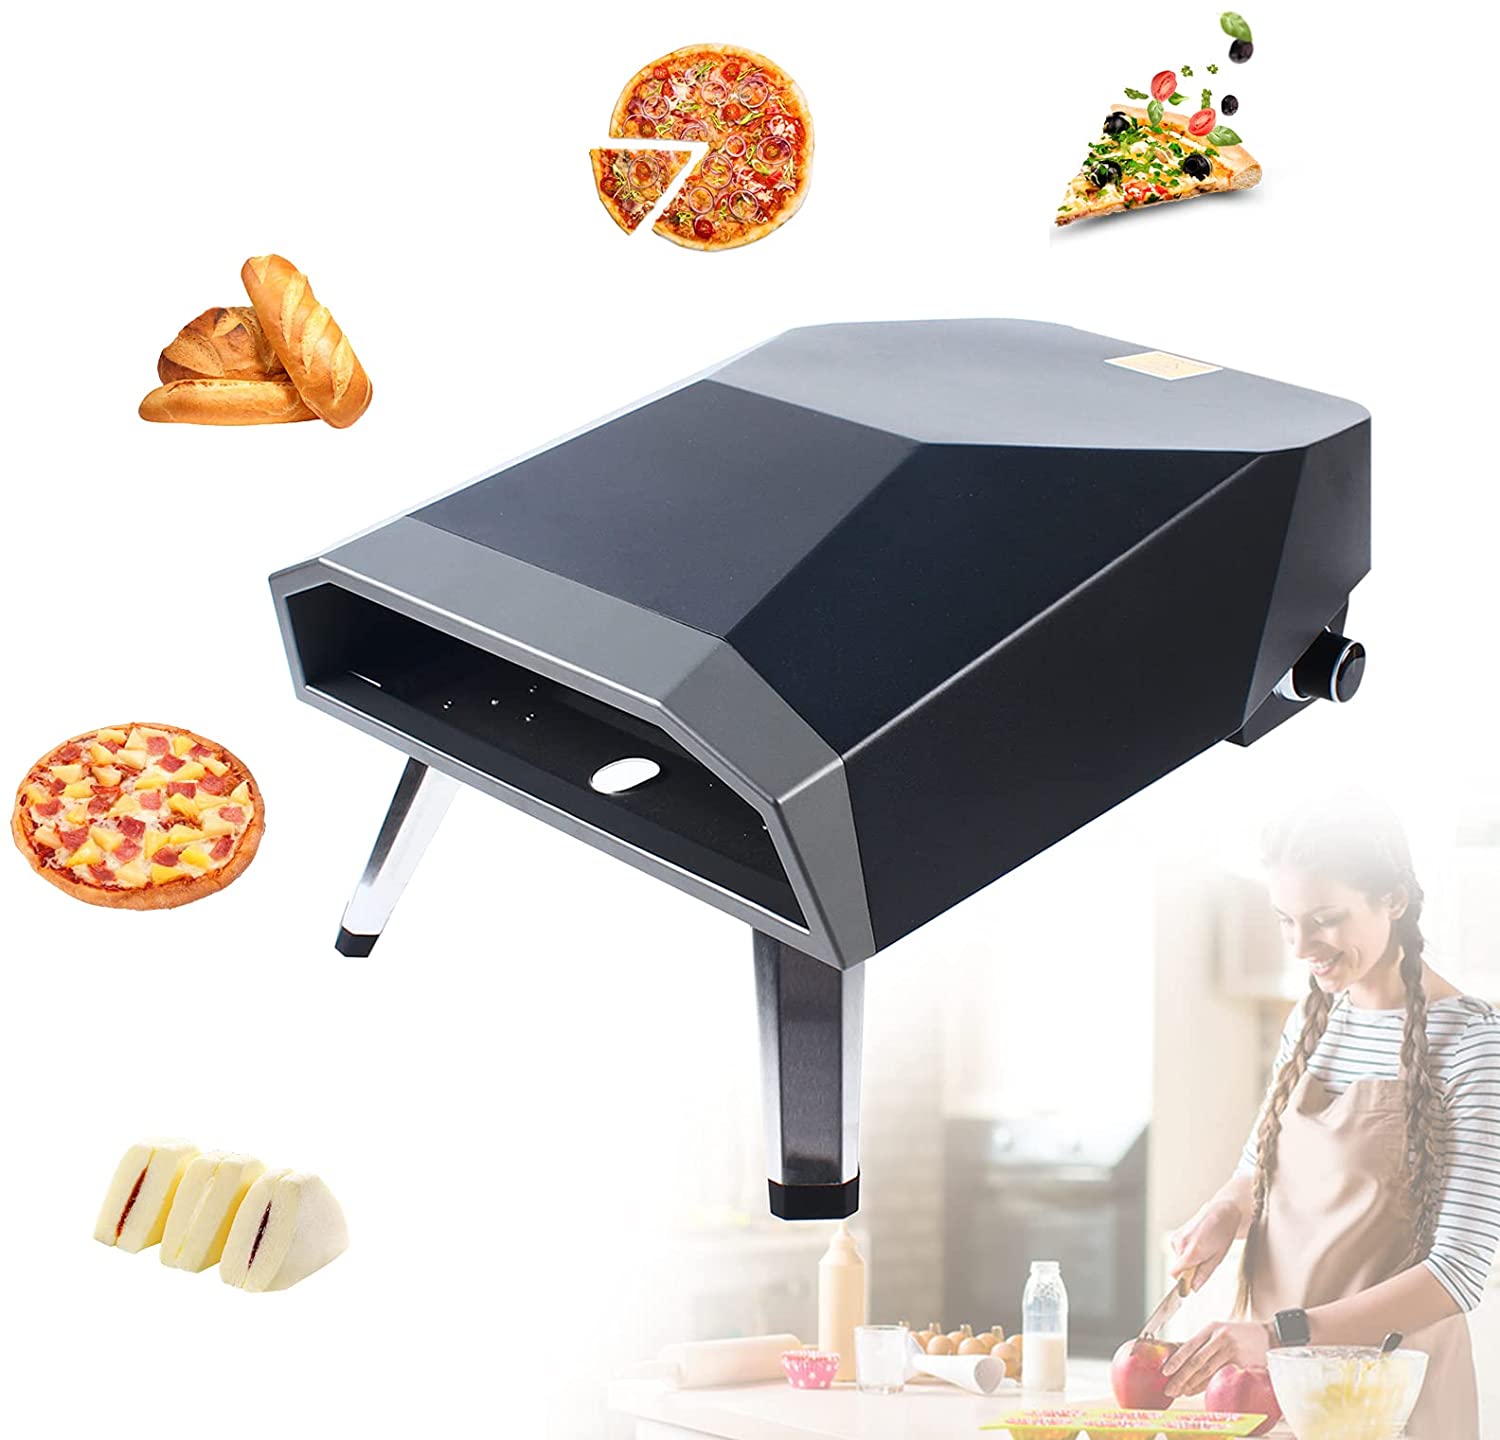 Portable Outdoor Pizza Oven with Pizza Shovel